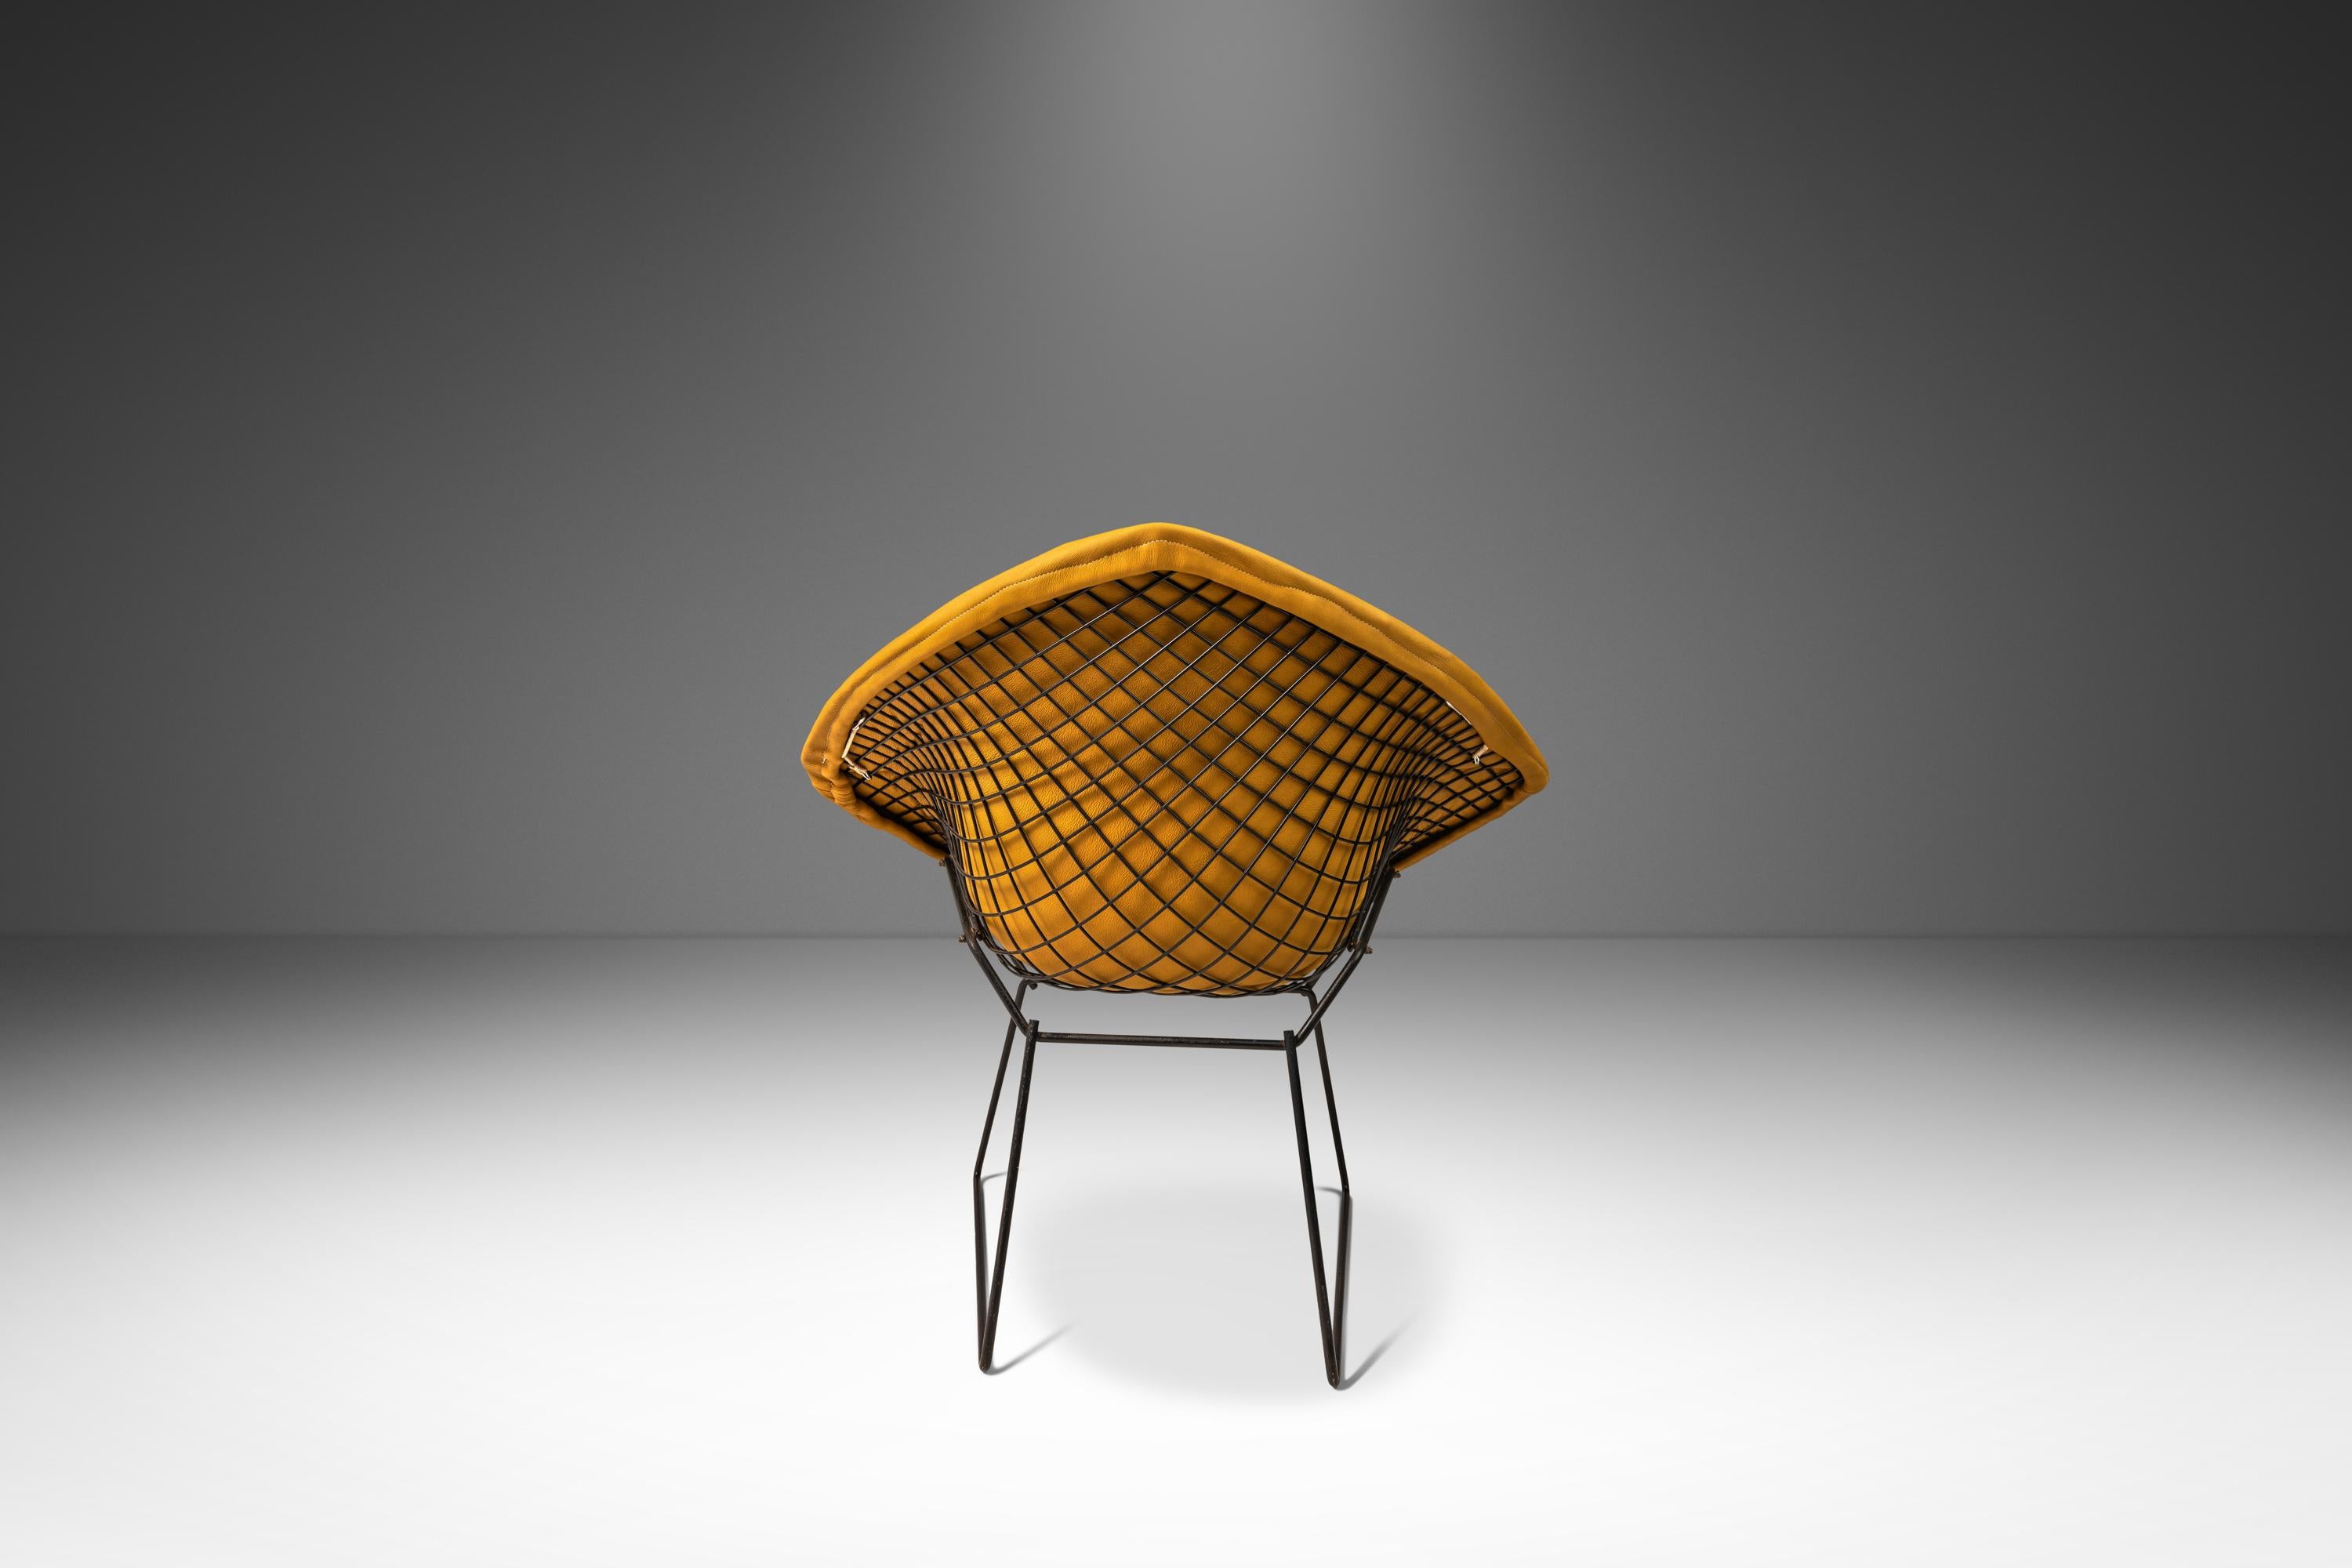 Steel Set of 2  'Diamond' Leather Chairs by Harry Bertoia for Knoll, USA, c. 1960's For Sale